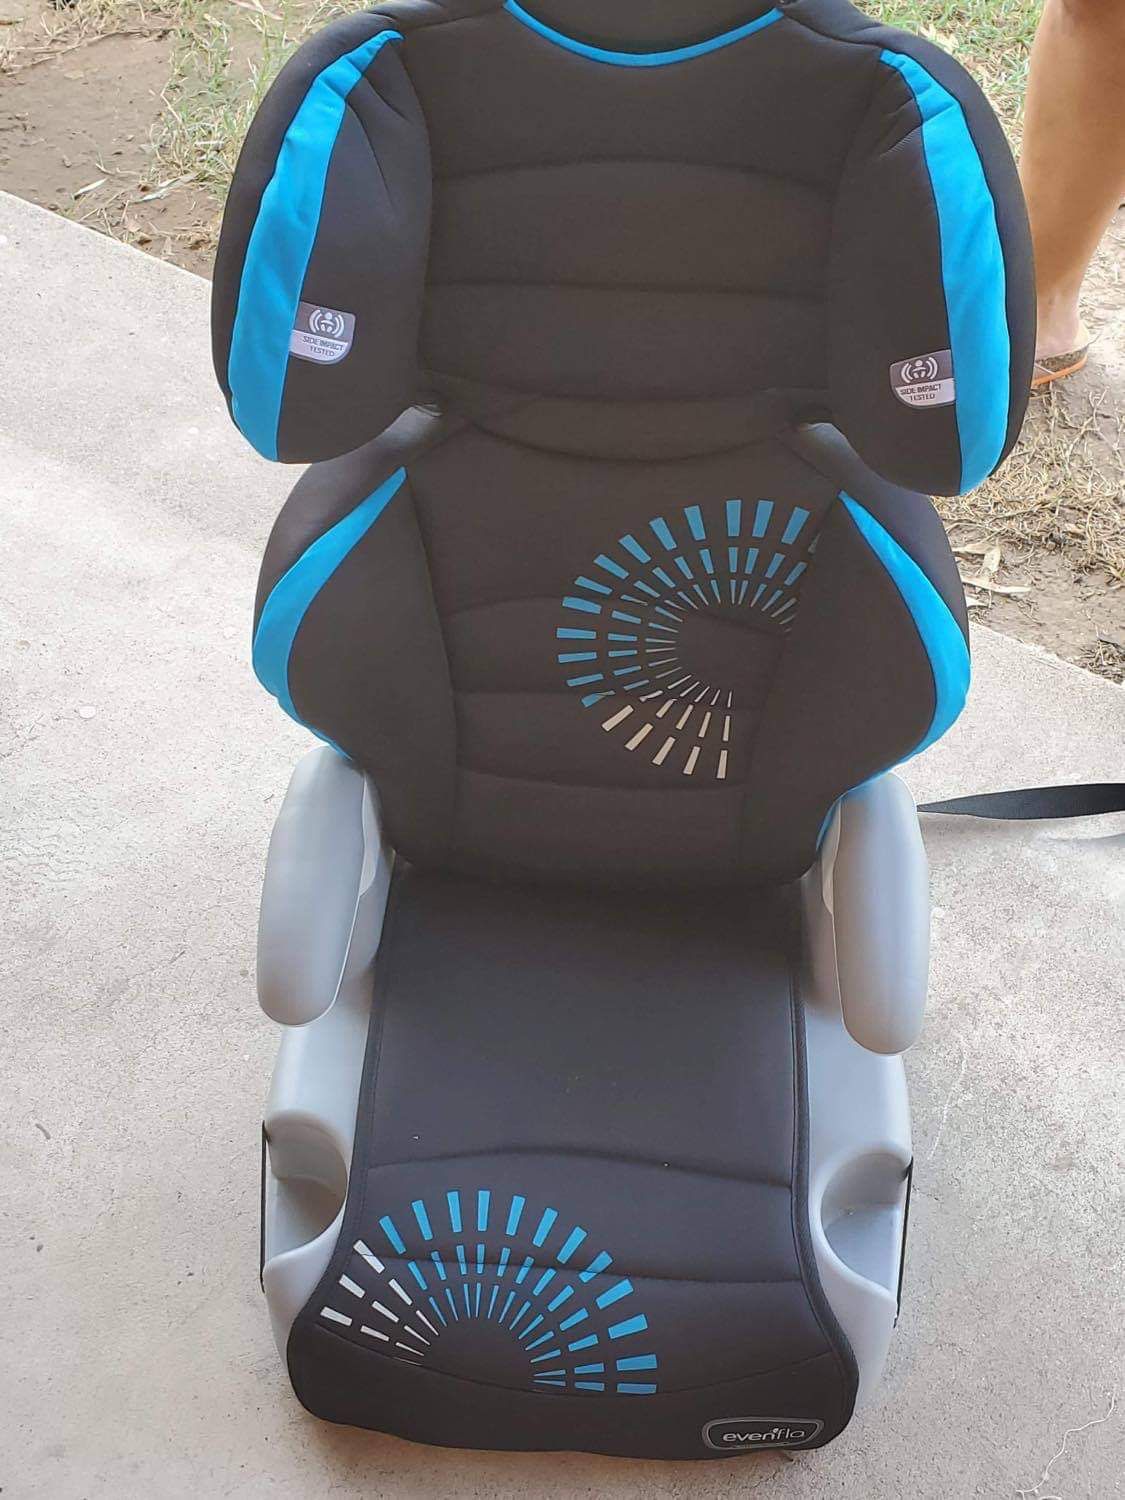 Booster seat and stroller